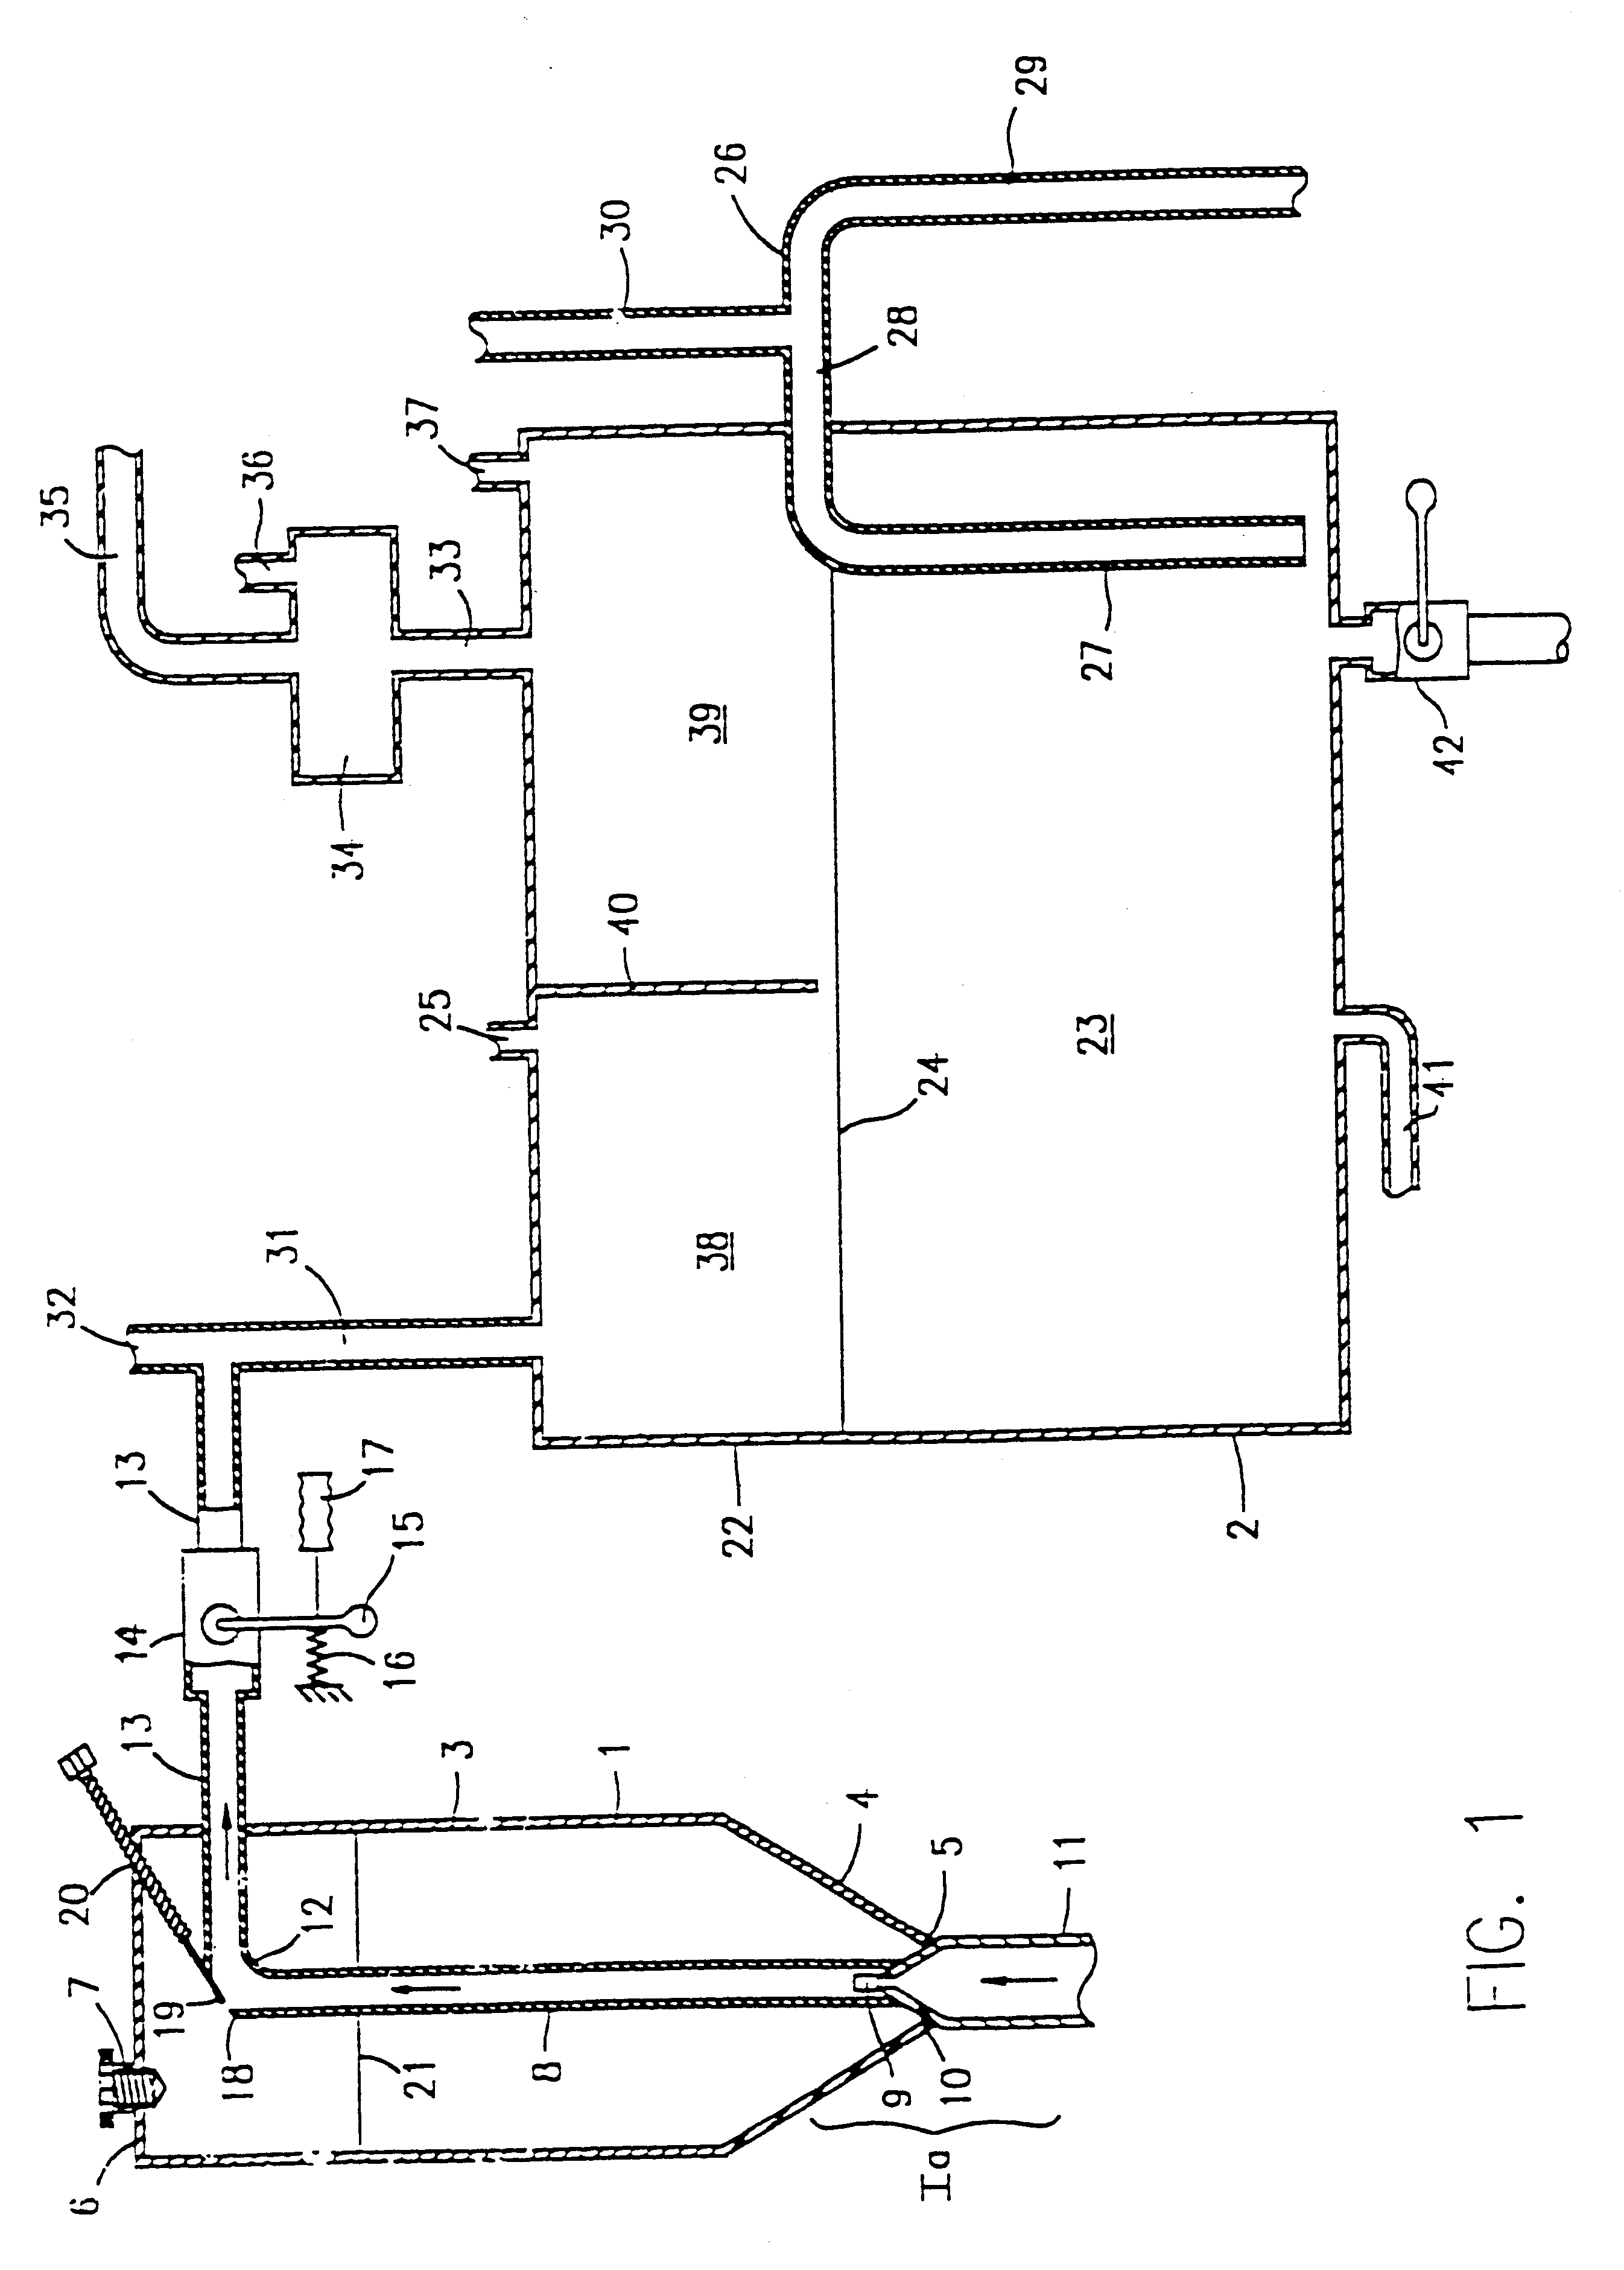 Phosphine generator for producing phosphine-containing gas